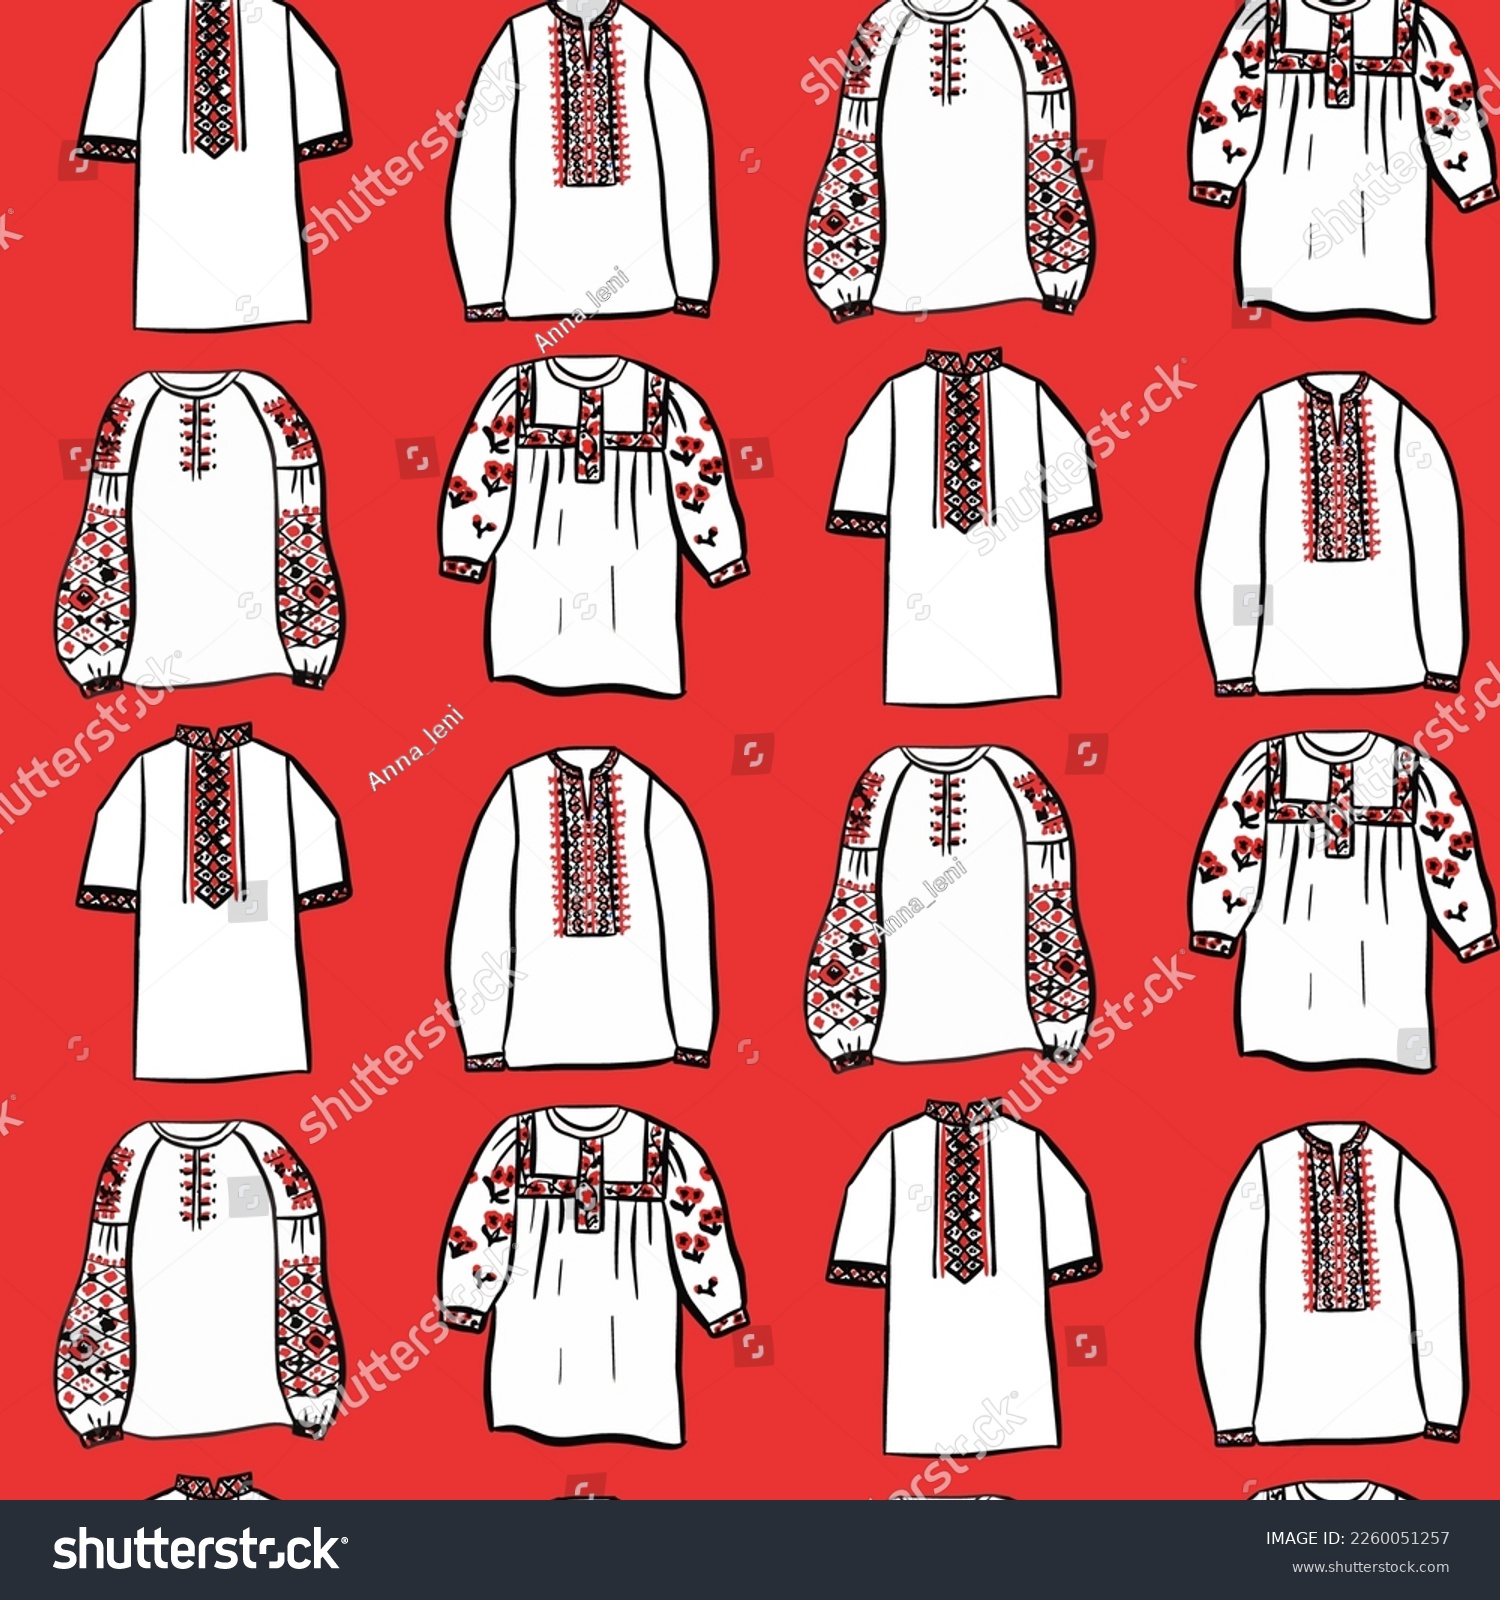 SVG of Red Ukraine Embroidery Shirt Seamless Pattern. Vector Illustration of Sketch Doodle Hand drawn Ukrainian Cultural Clothes. svg